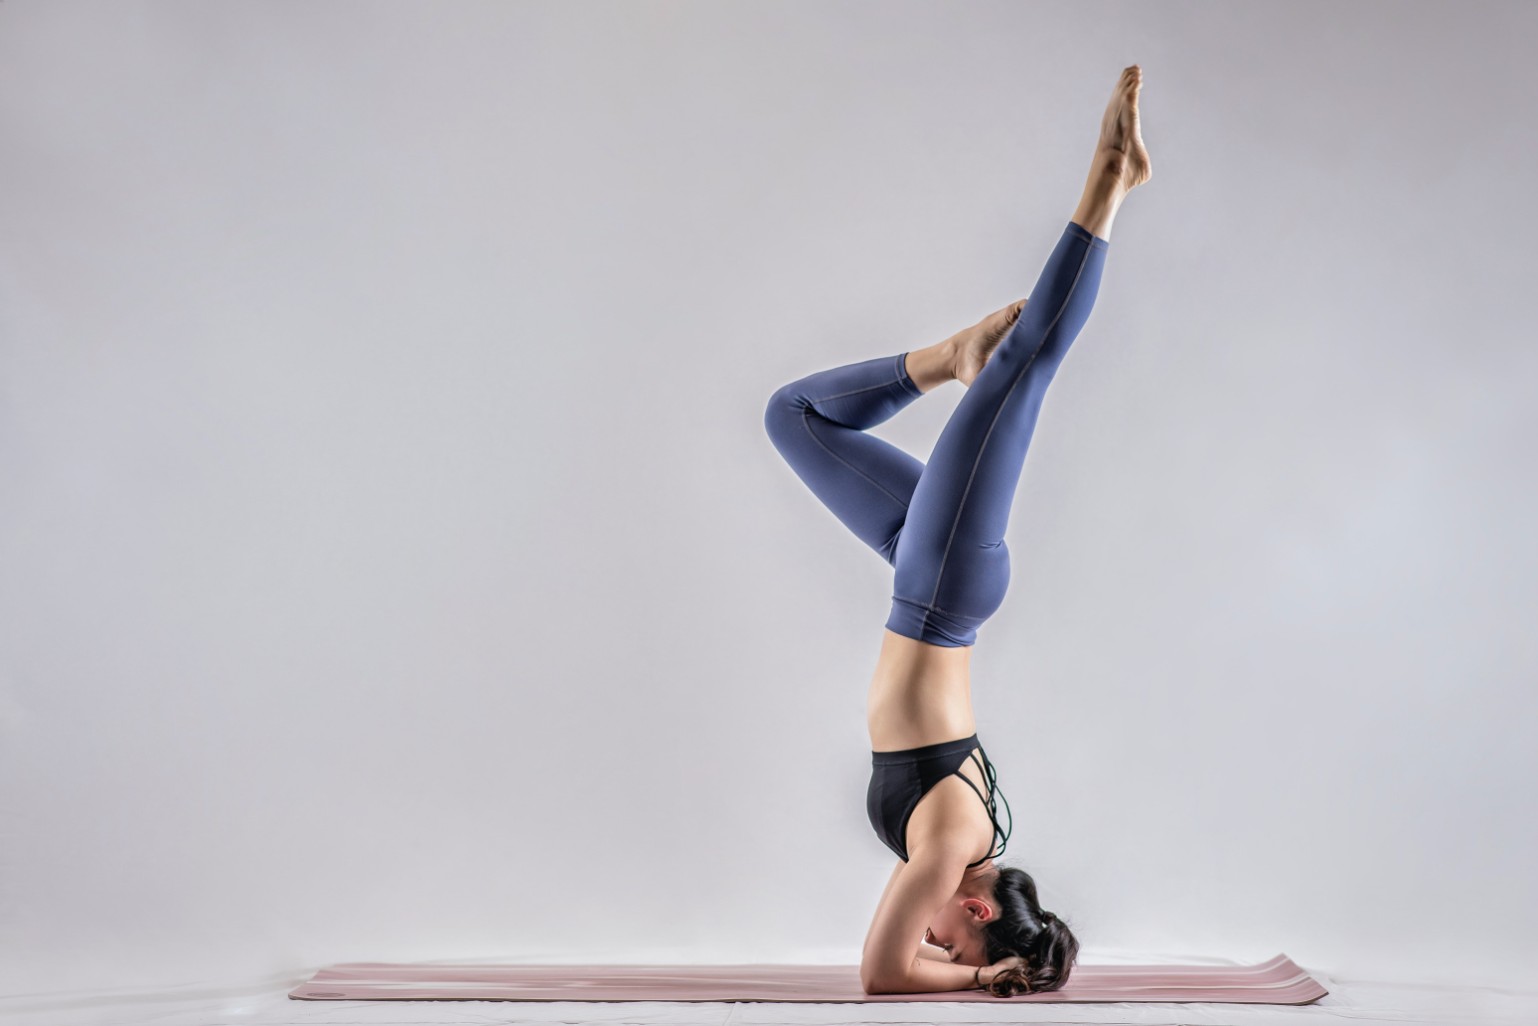 Yoga-Go Review: Does It Help Lose Weight?